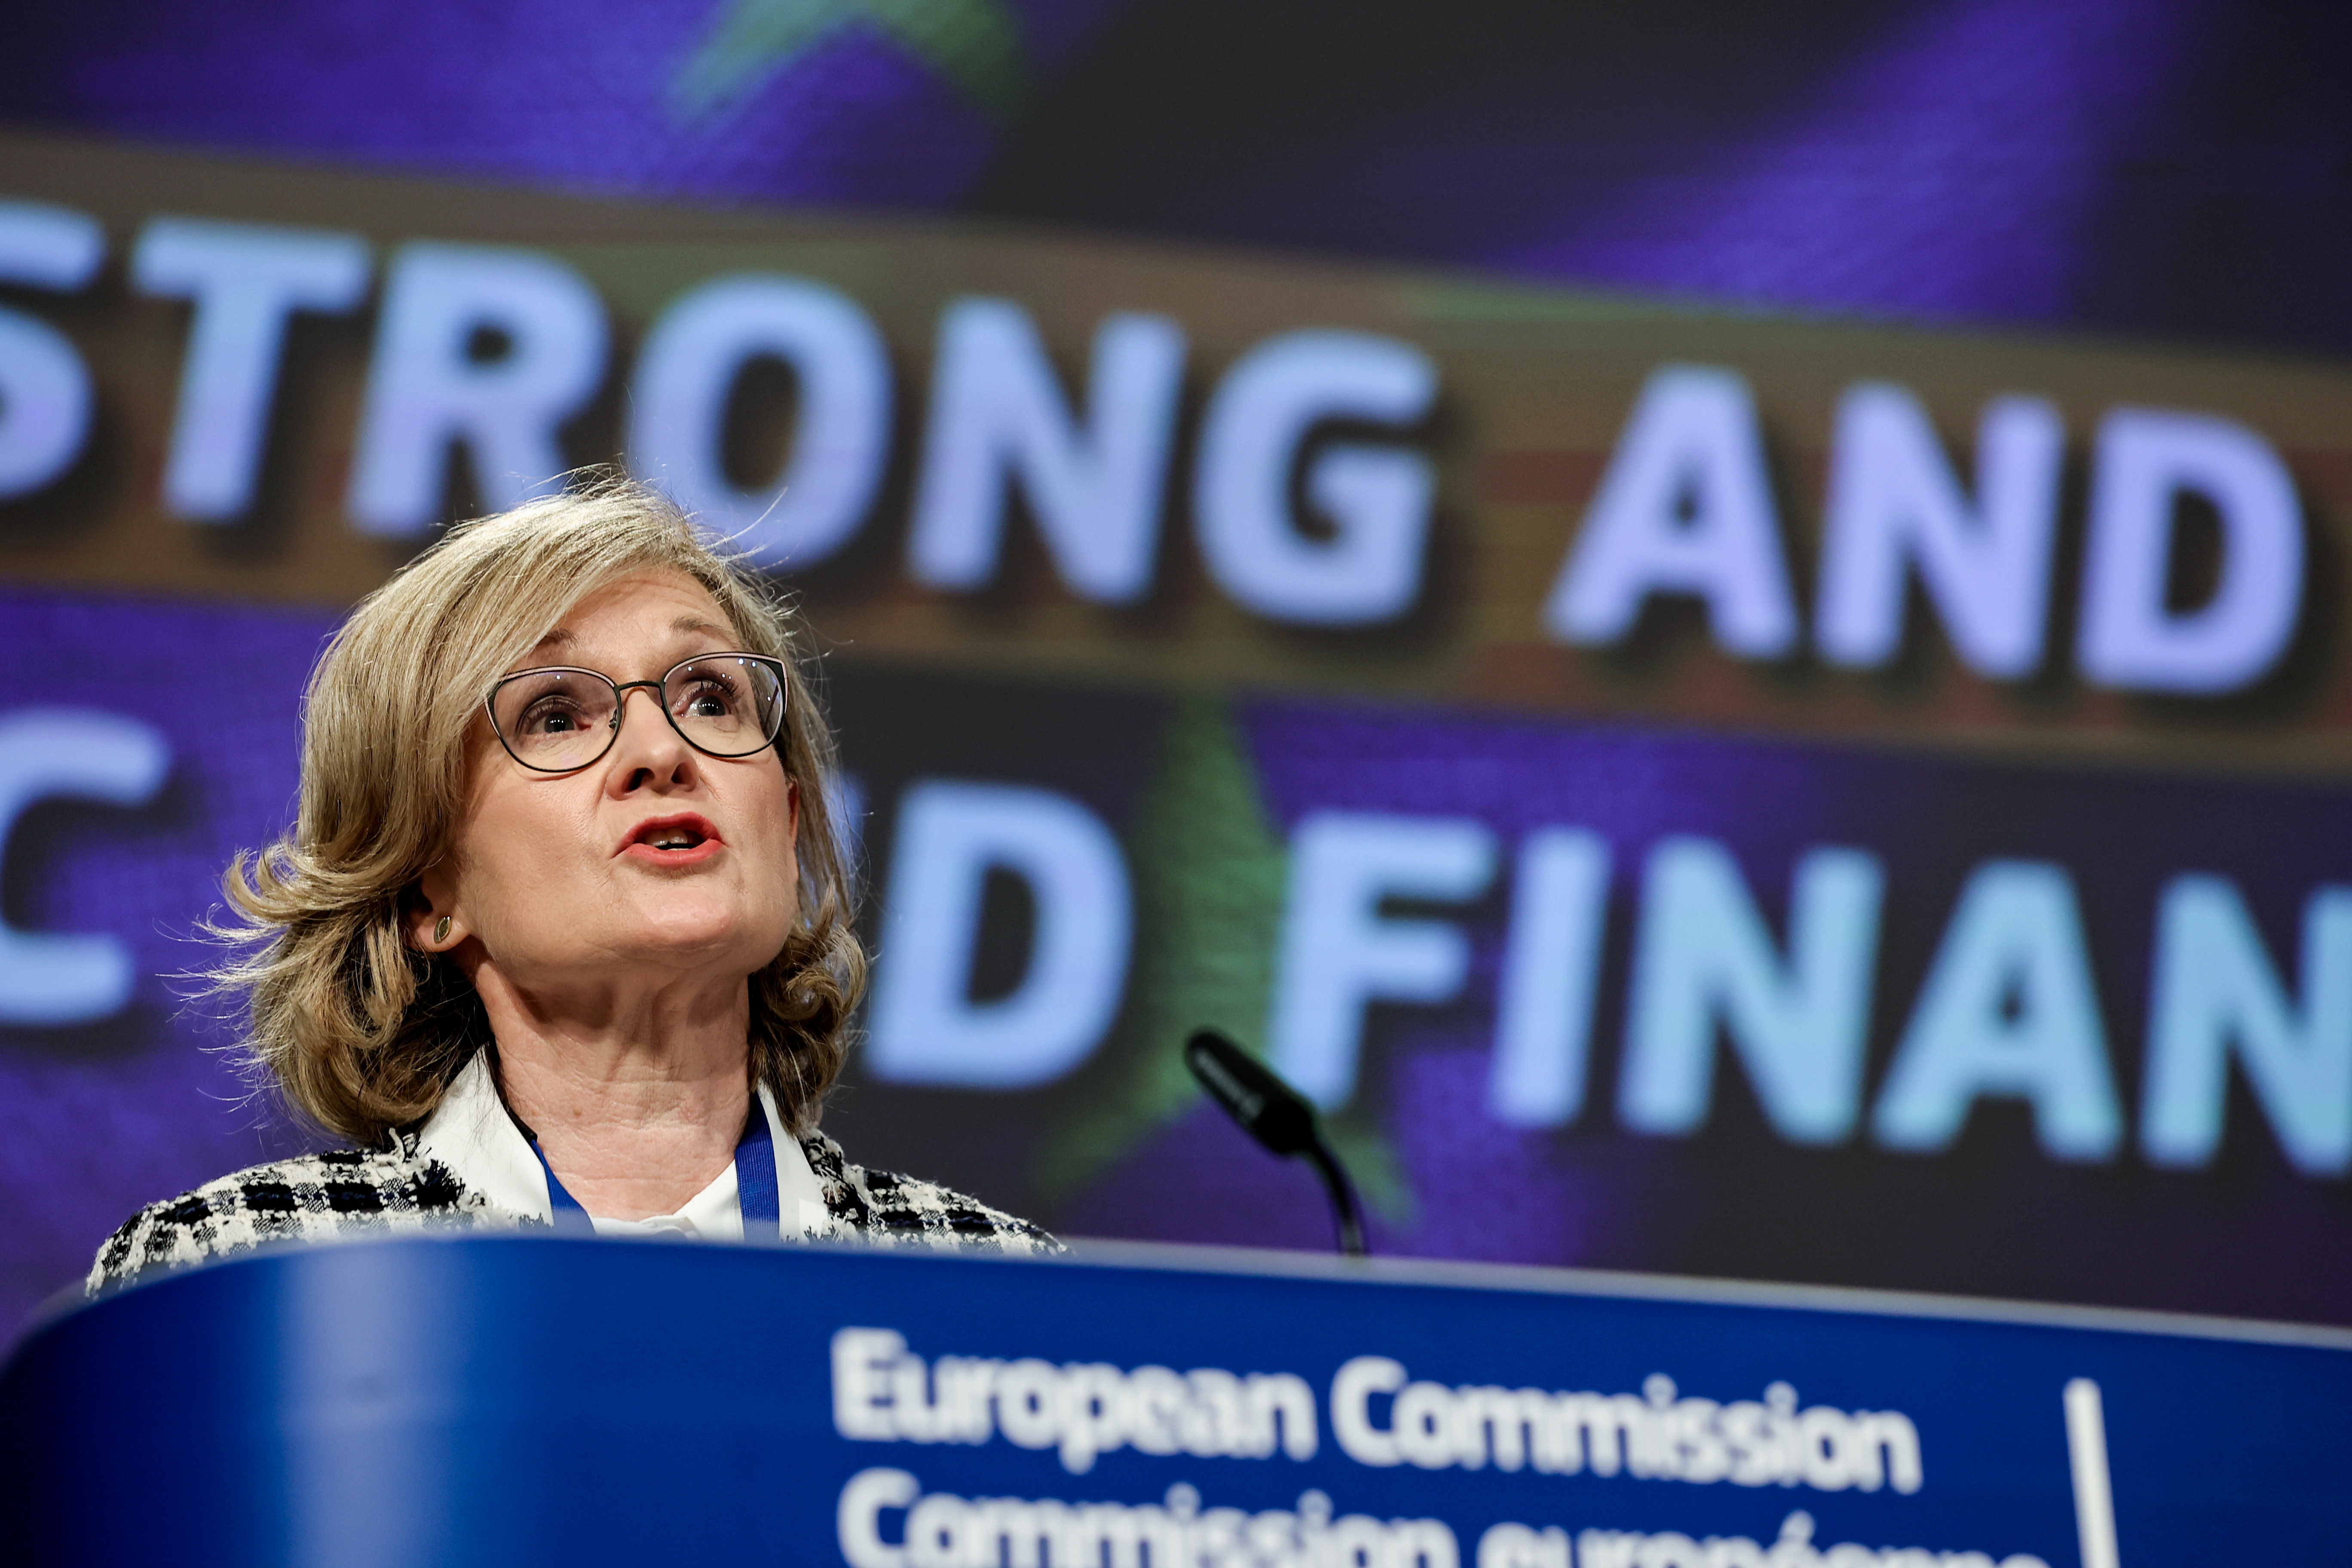 News conference resilience of Europe's economic and financial system in Brussels